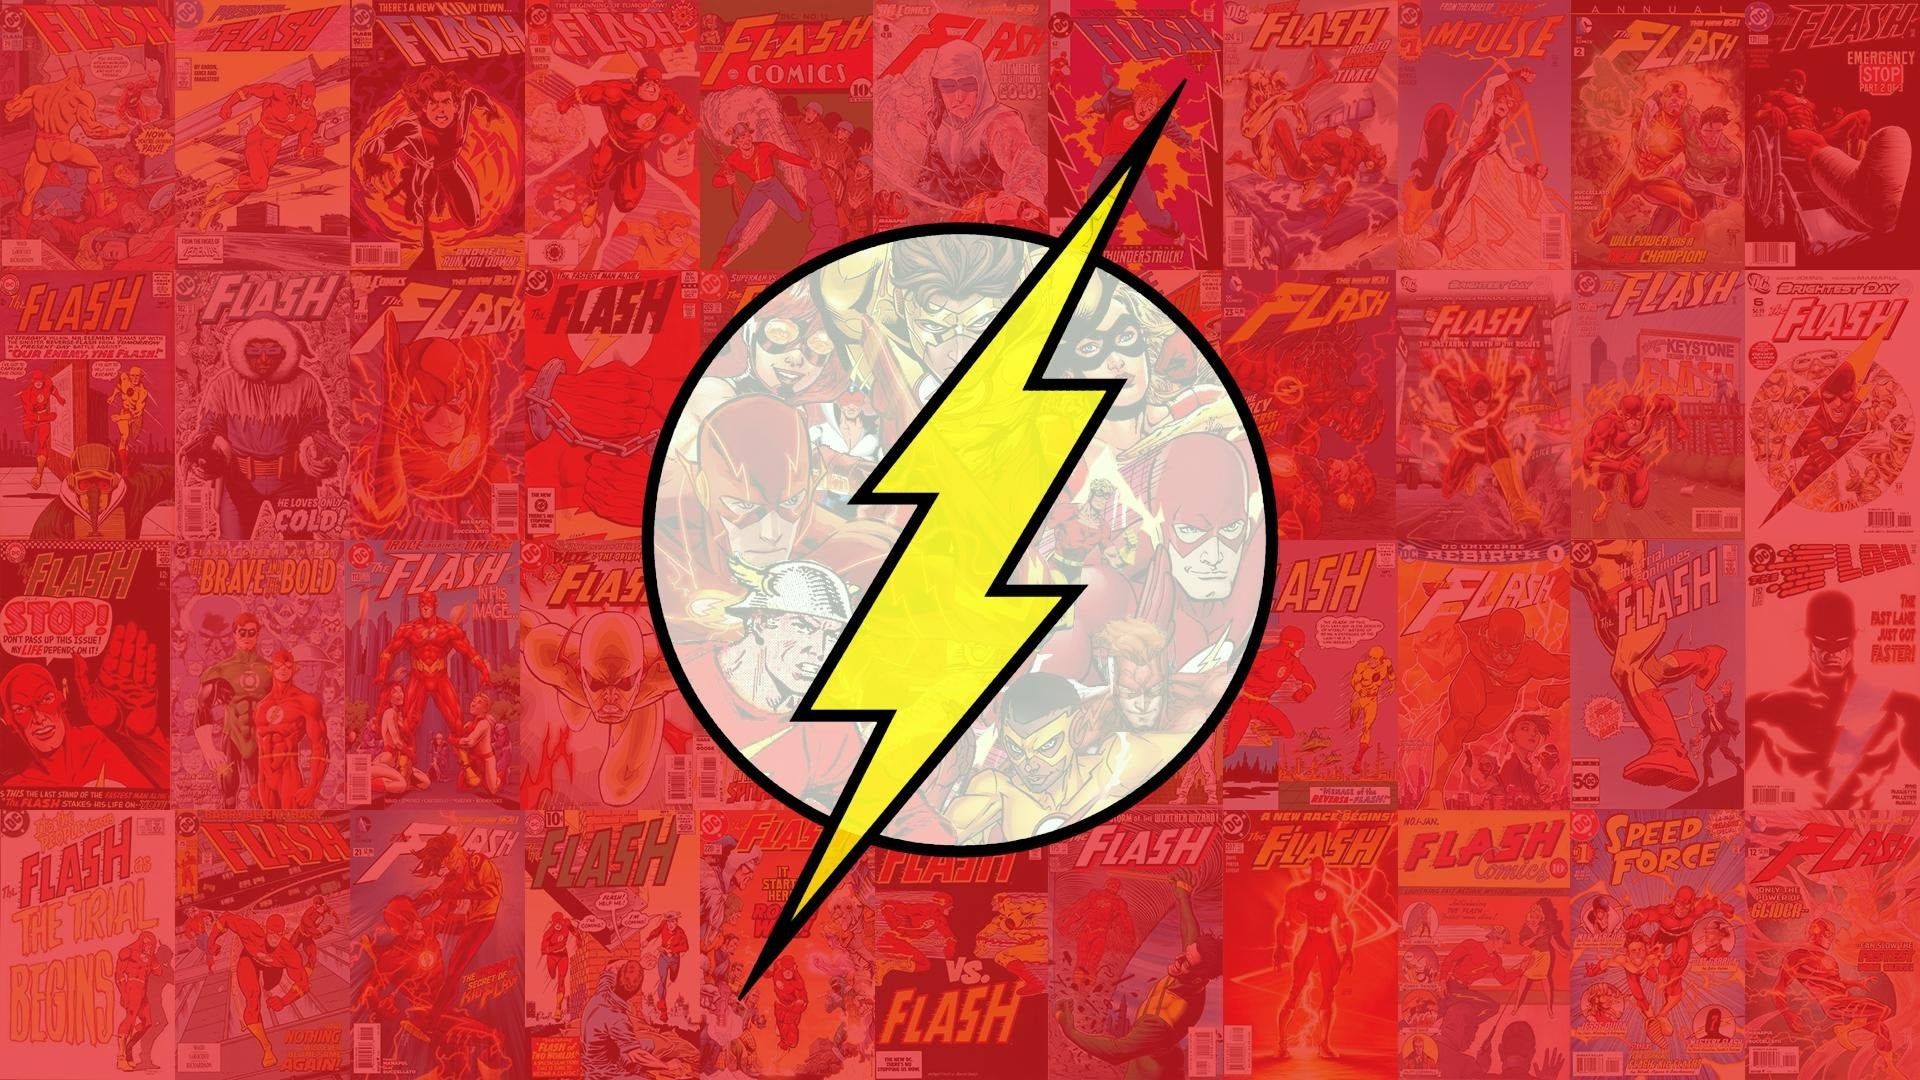 A Flash Family desktop wallpaper I made That also doubled as a